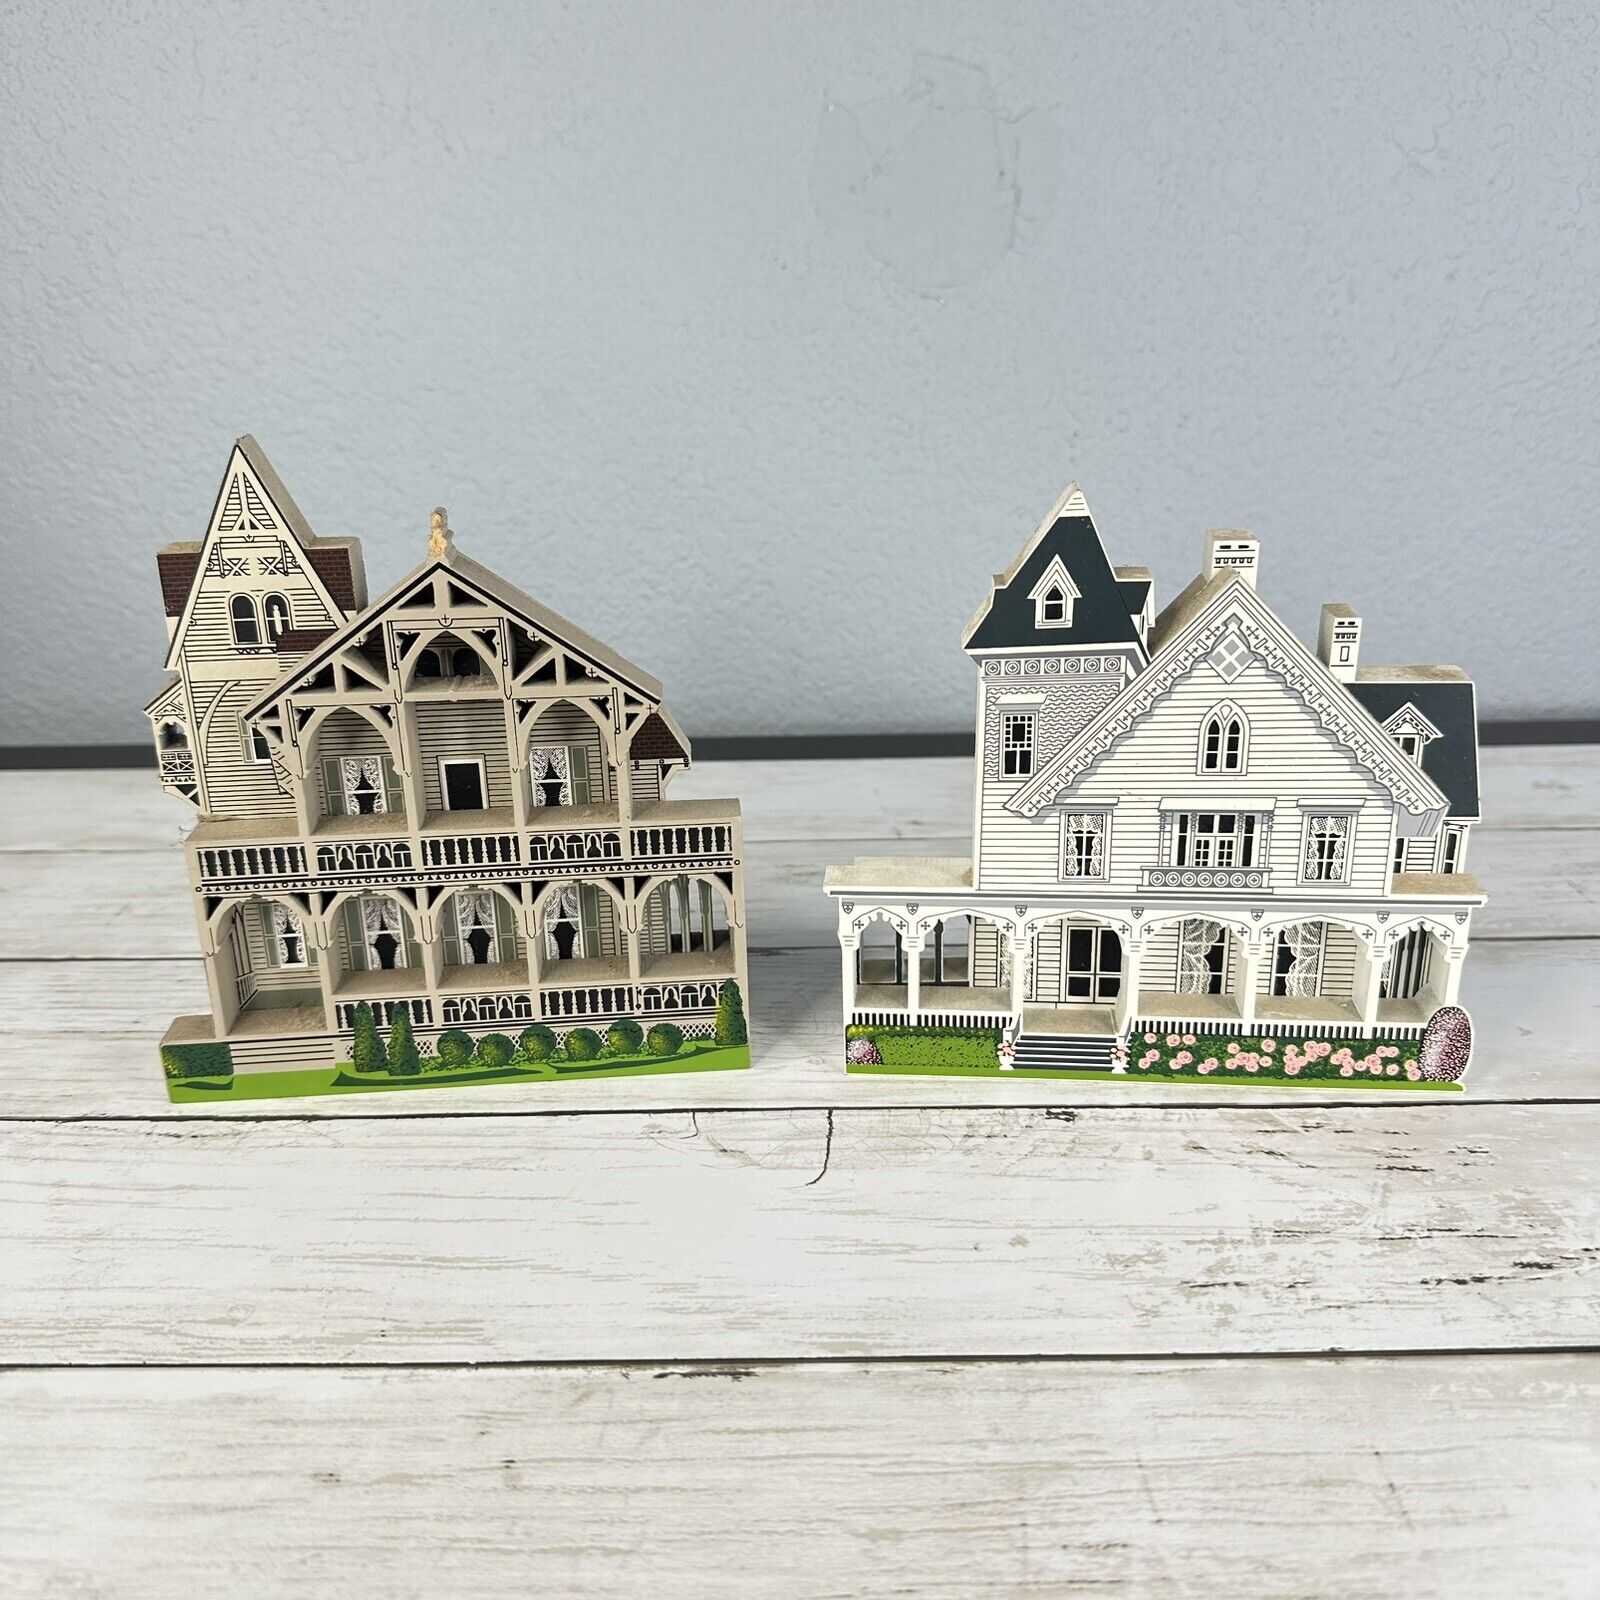 Lot of 2 Vintage Shelia’s Collectible Wooden Houses - Connecticut - 1 Signed